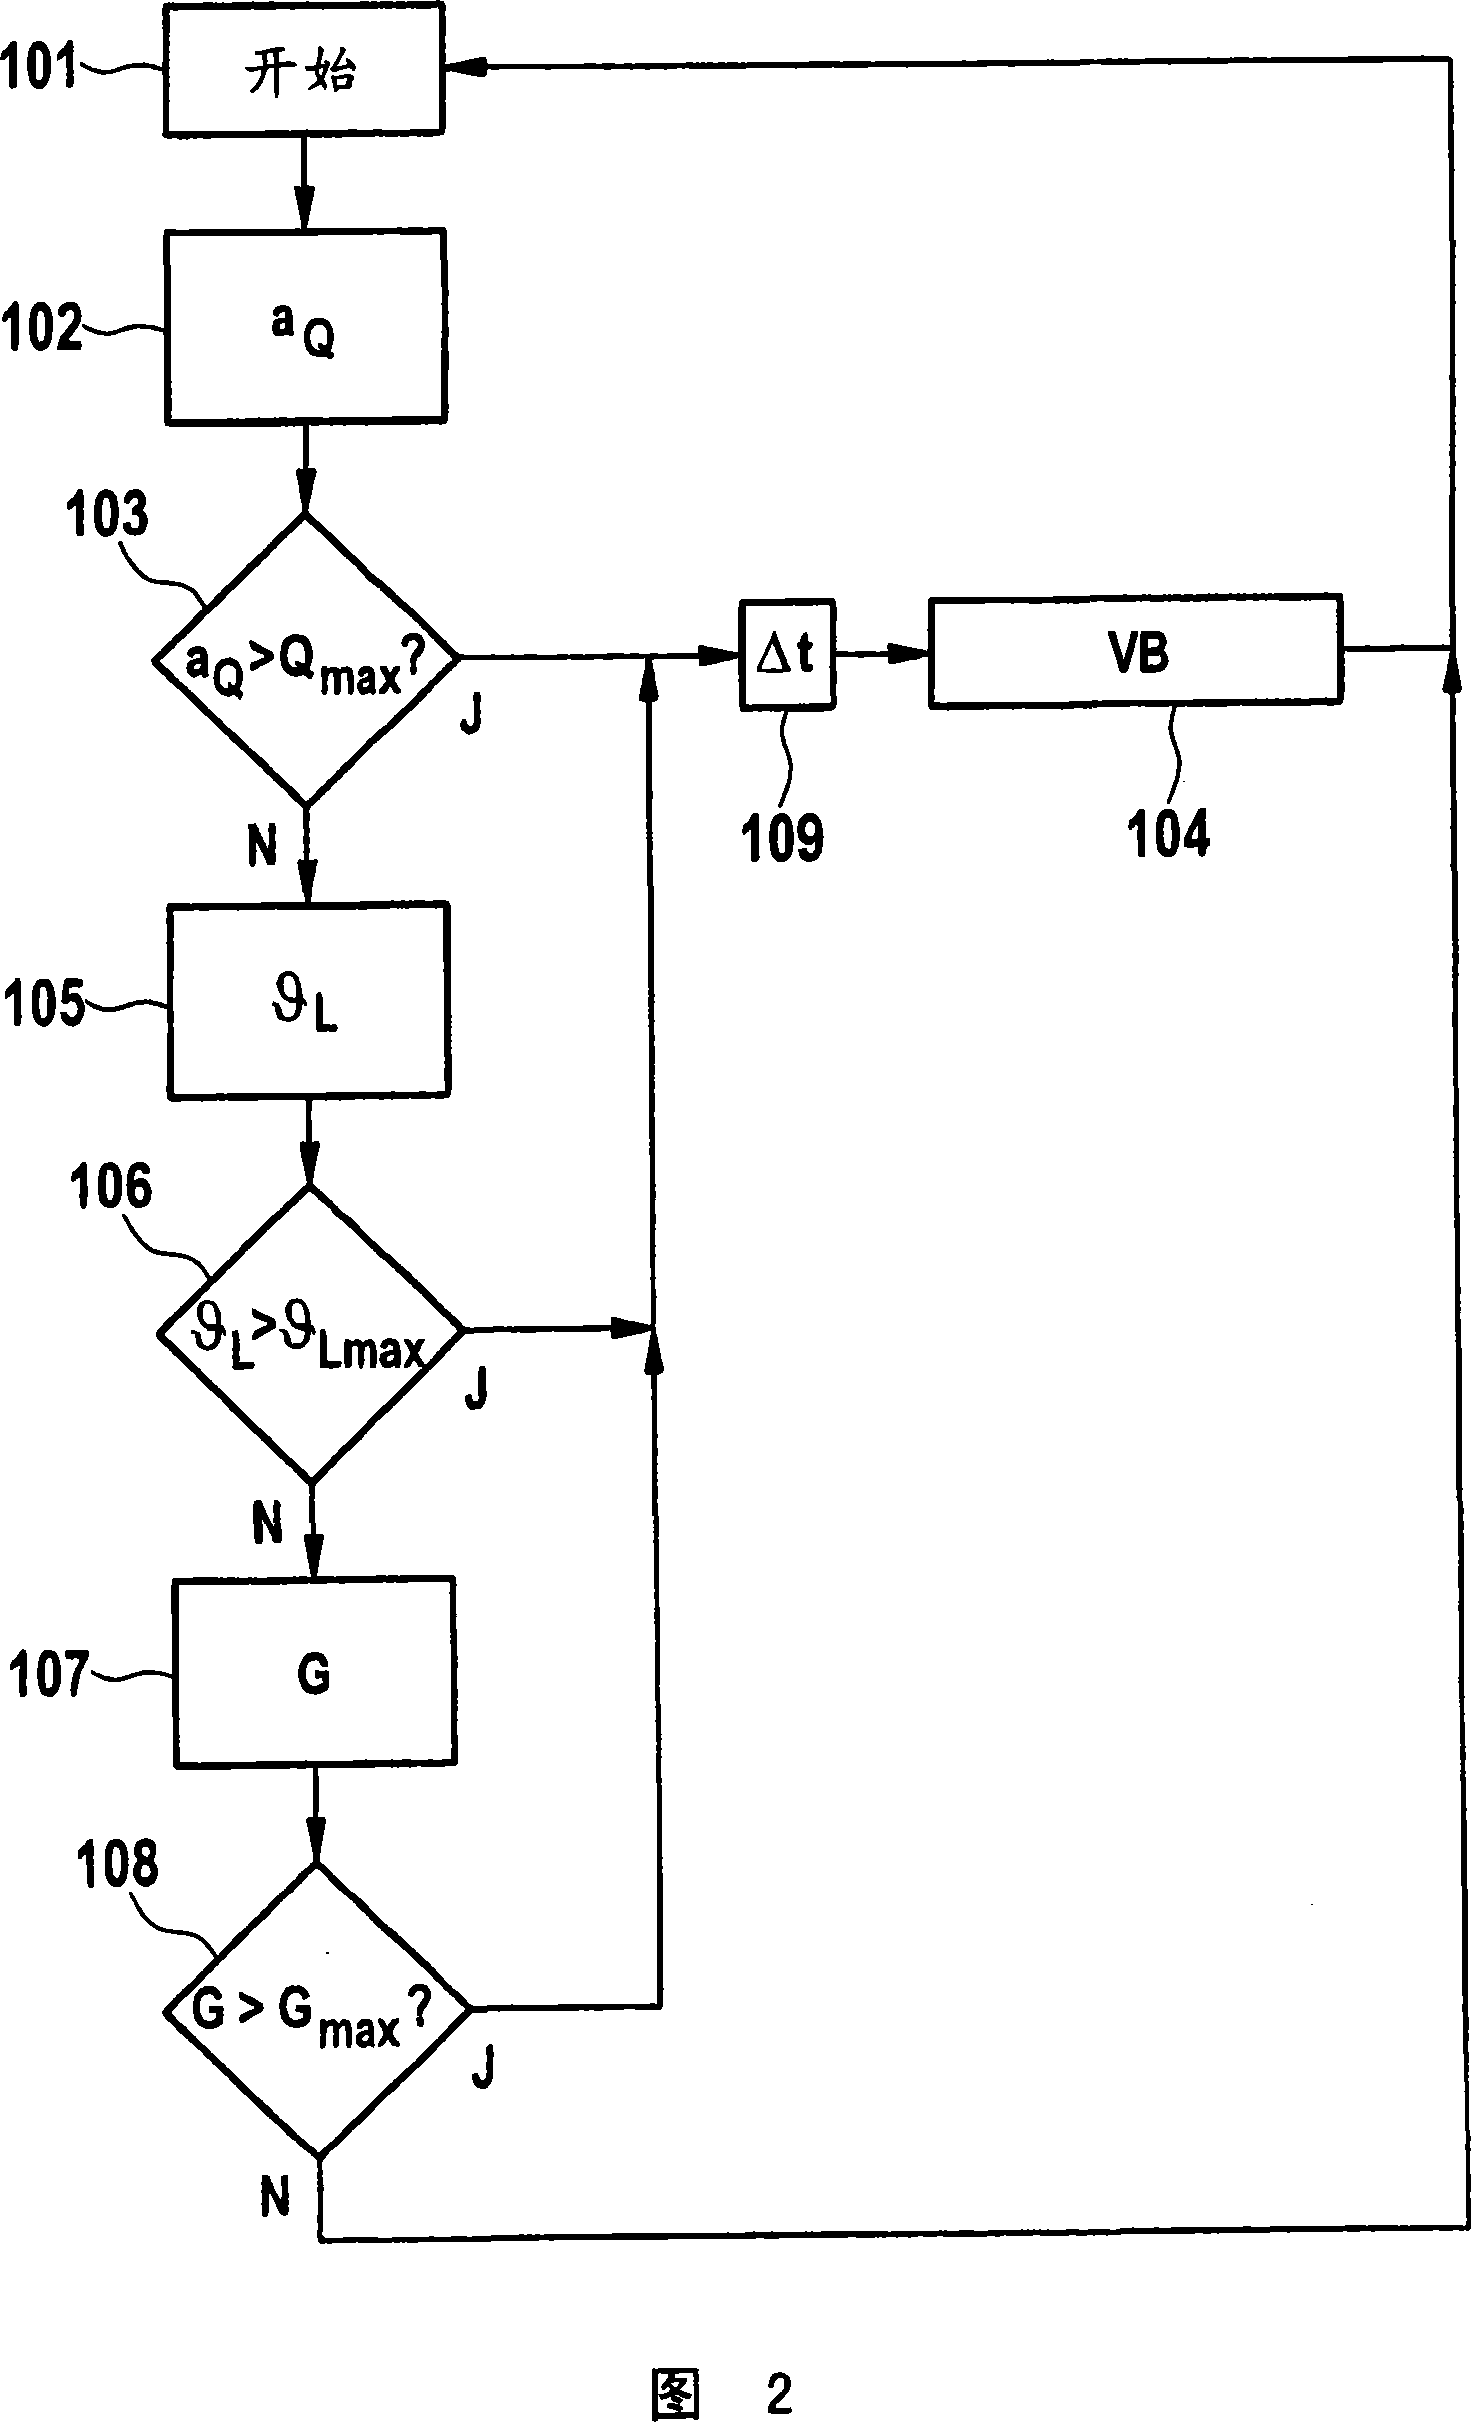 Method for operating a brake system of a motor vehicle